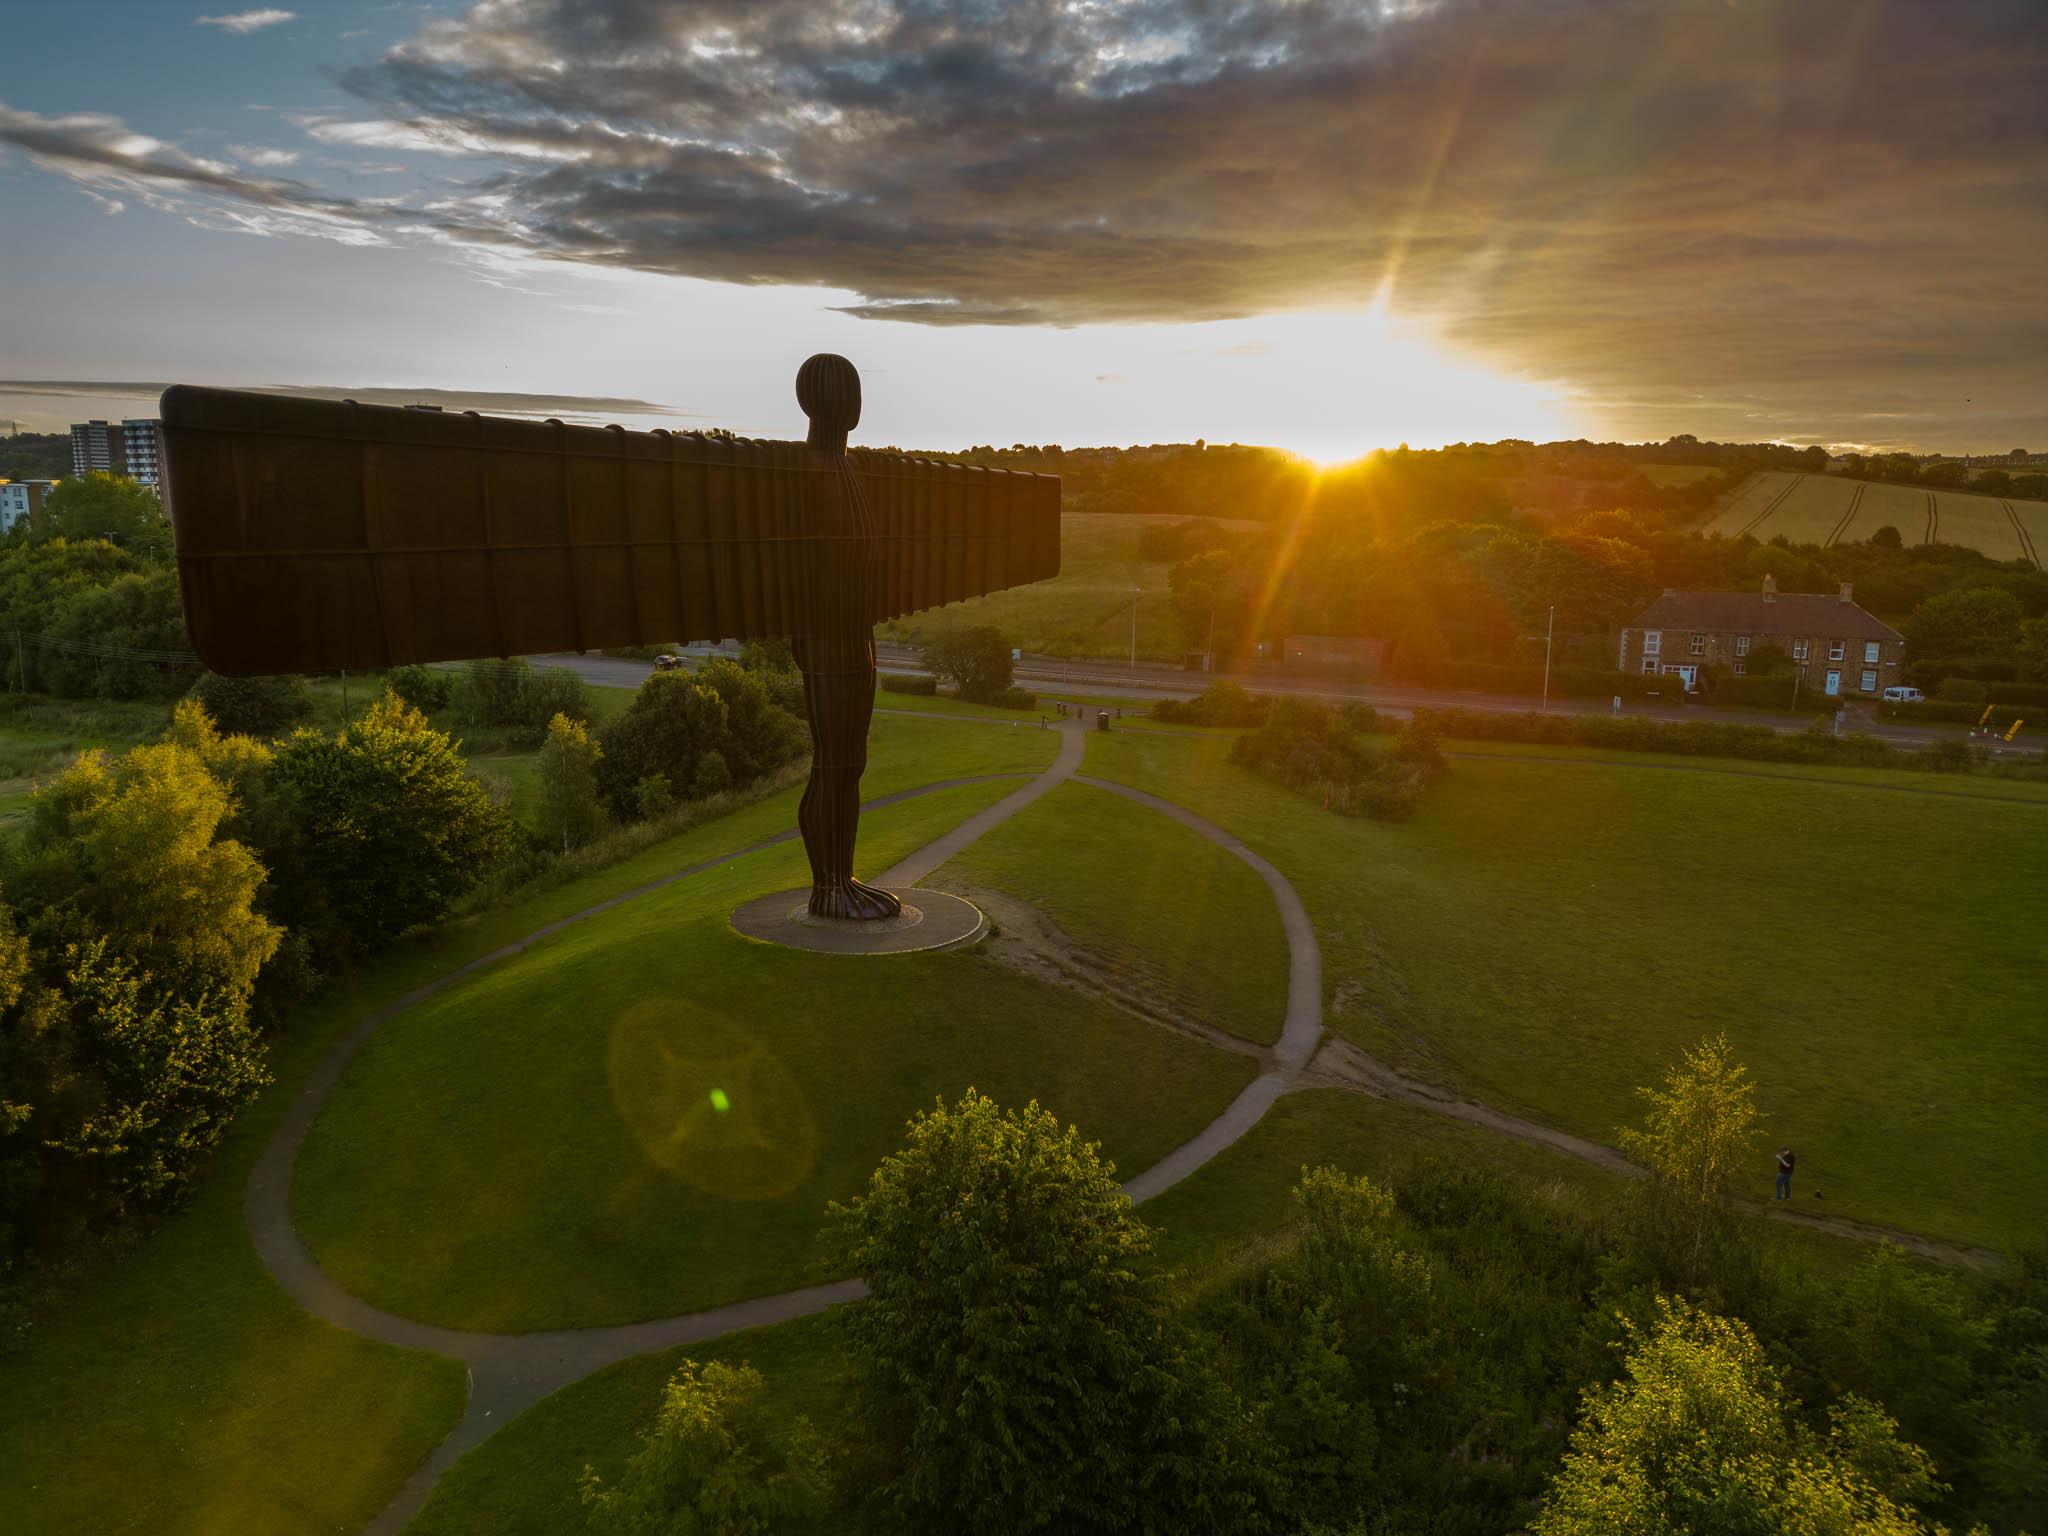 Angel of the North in England at sunrise, shot from a drone